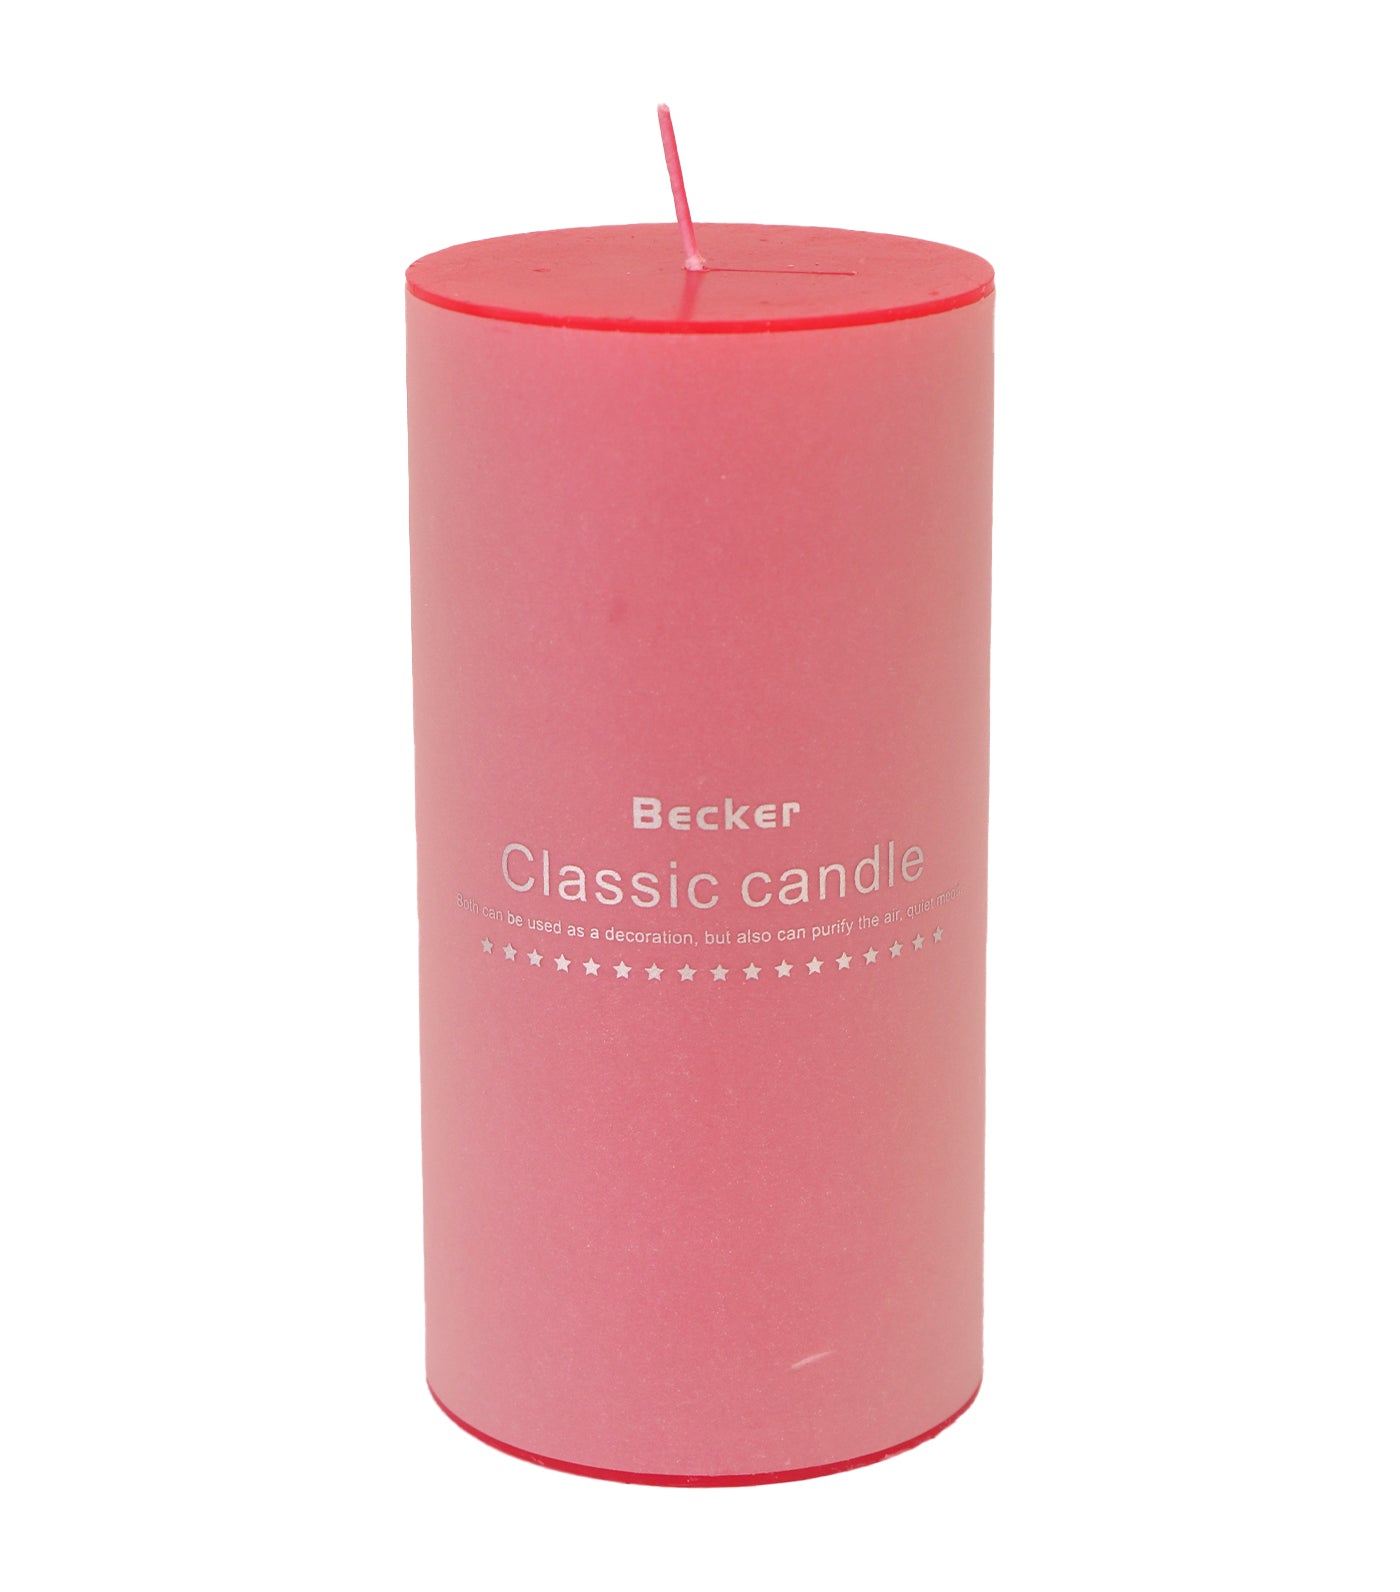 Rustan's Home Cylindrical Candle Set - Red